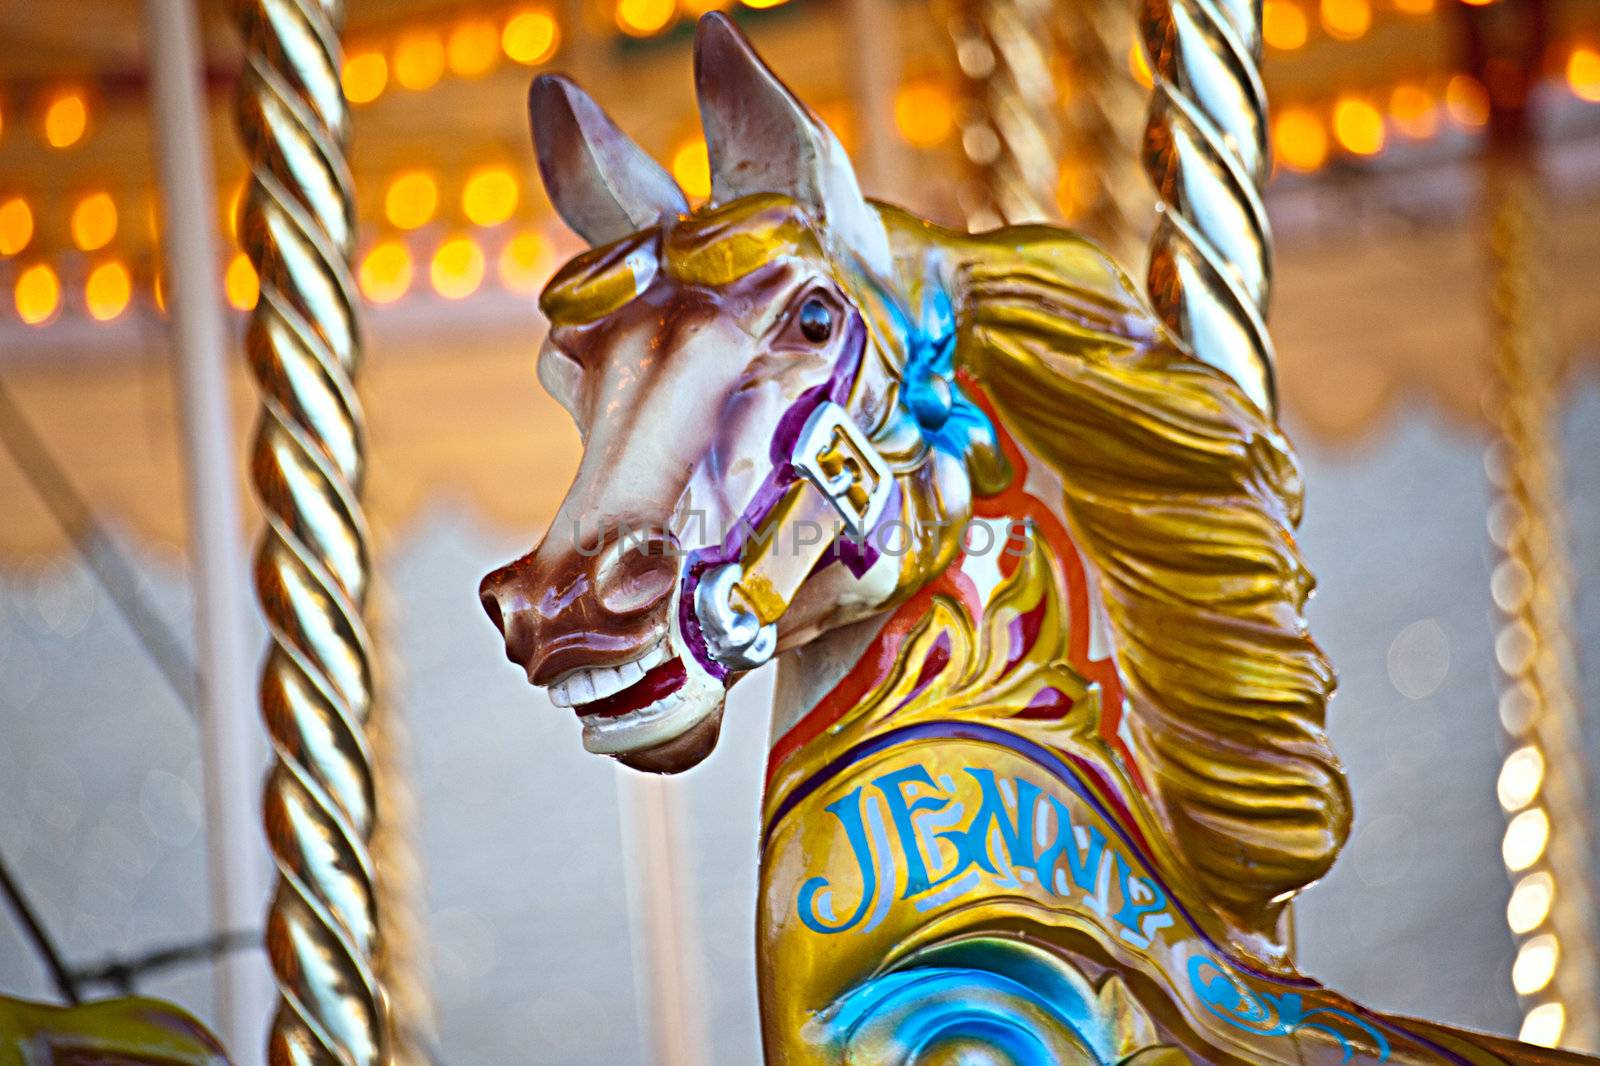 A colorful wooden horse on a carousel ride